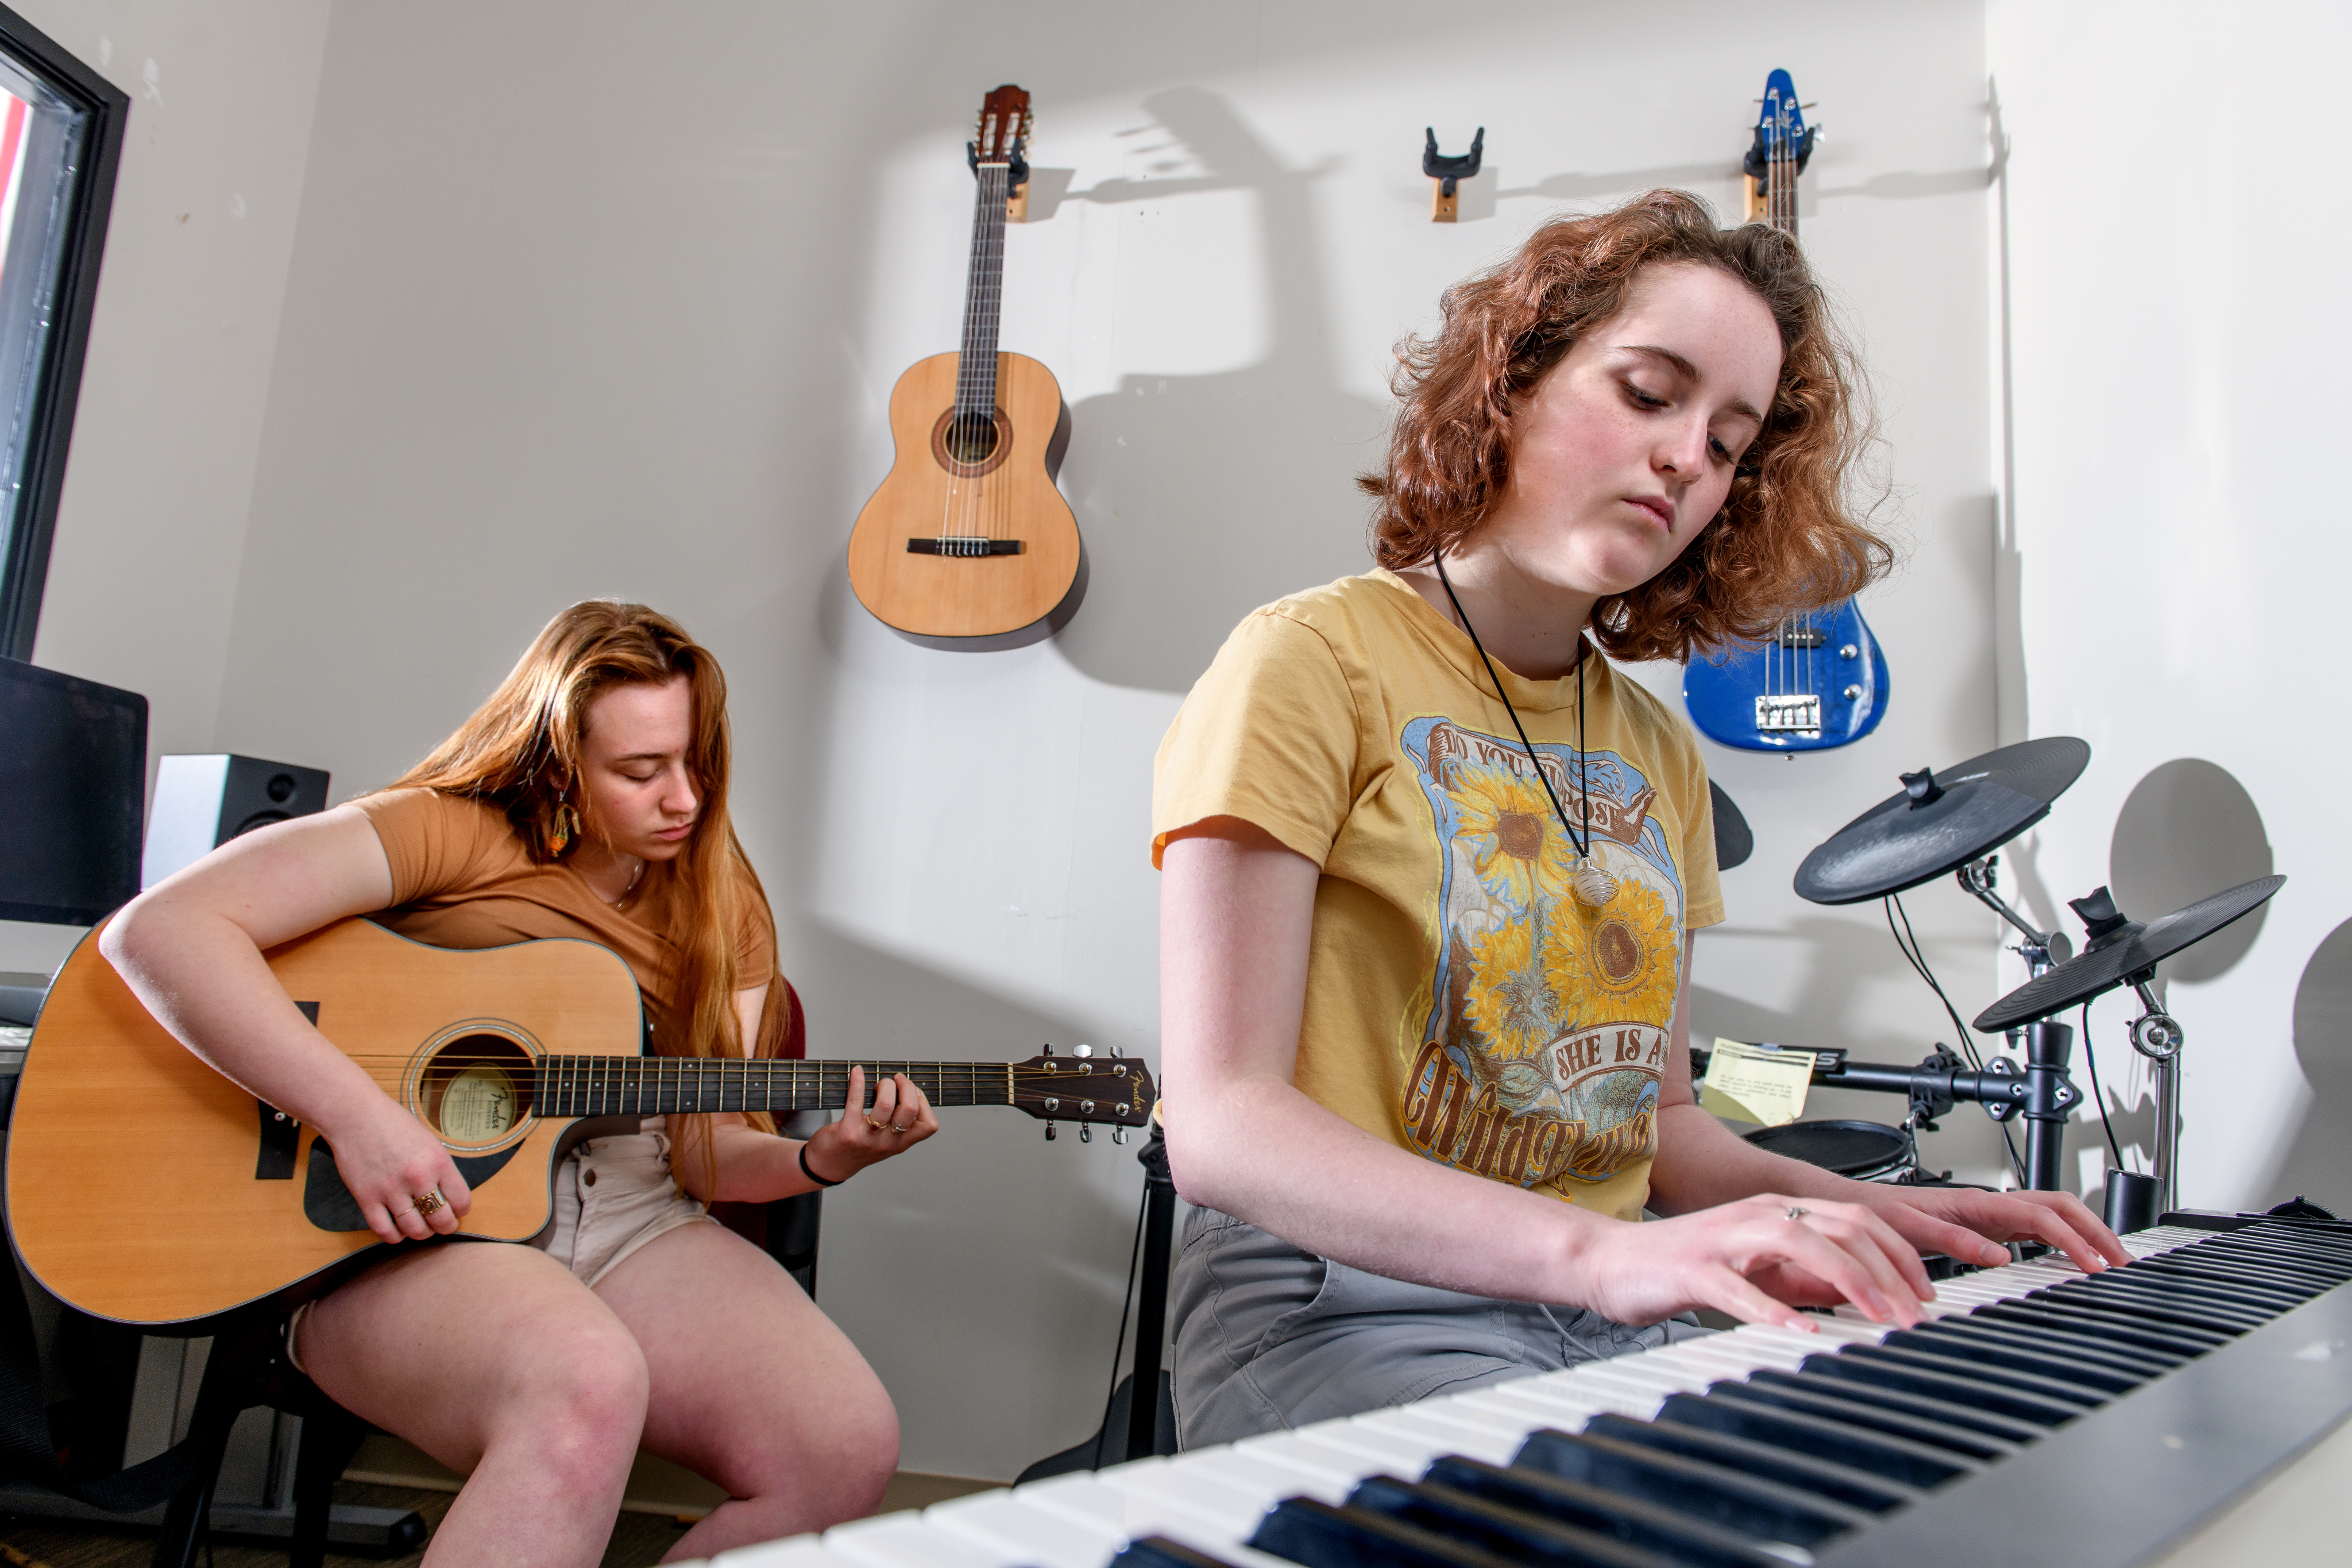 New Media students play the keyboard and guitar in the sound studio.